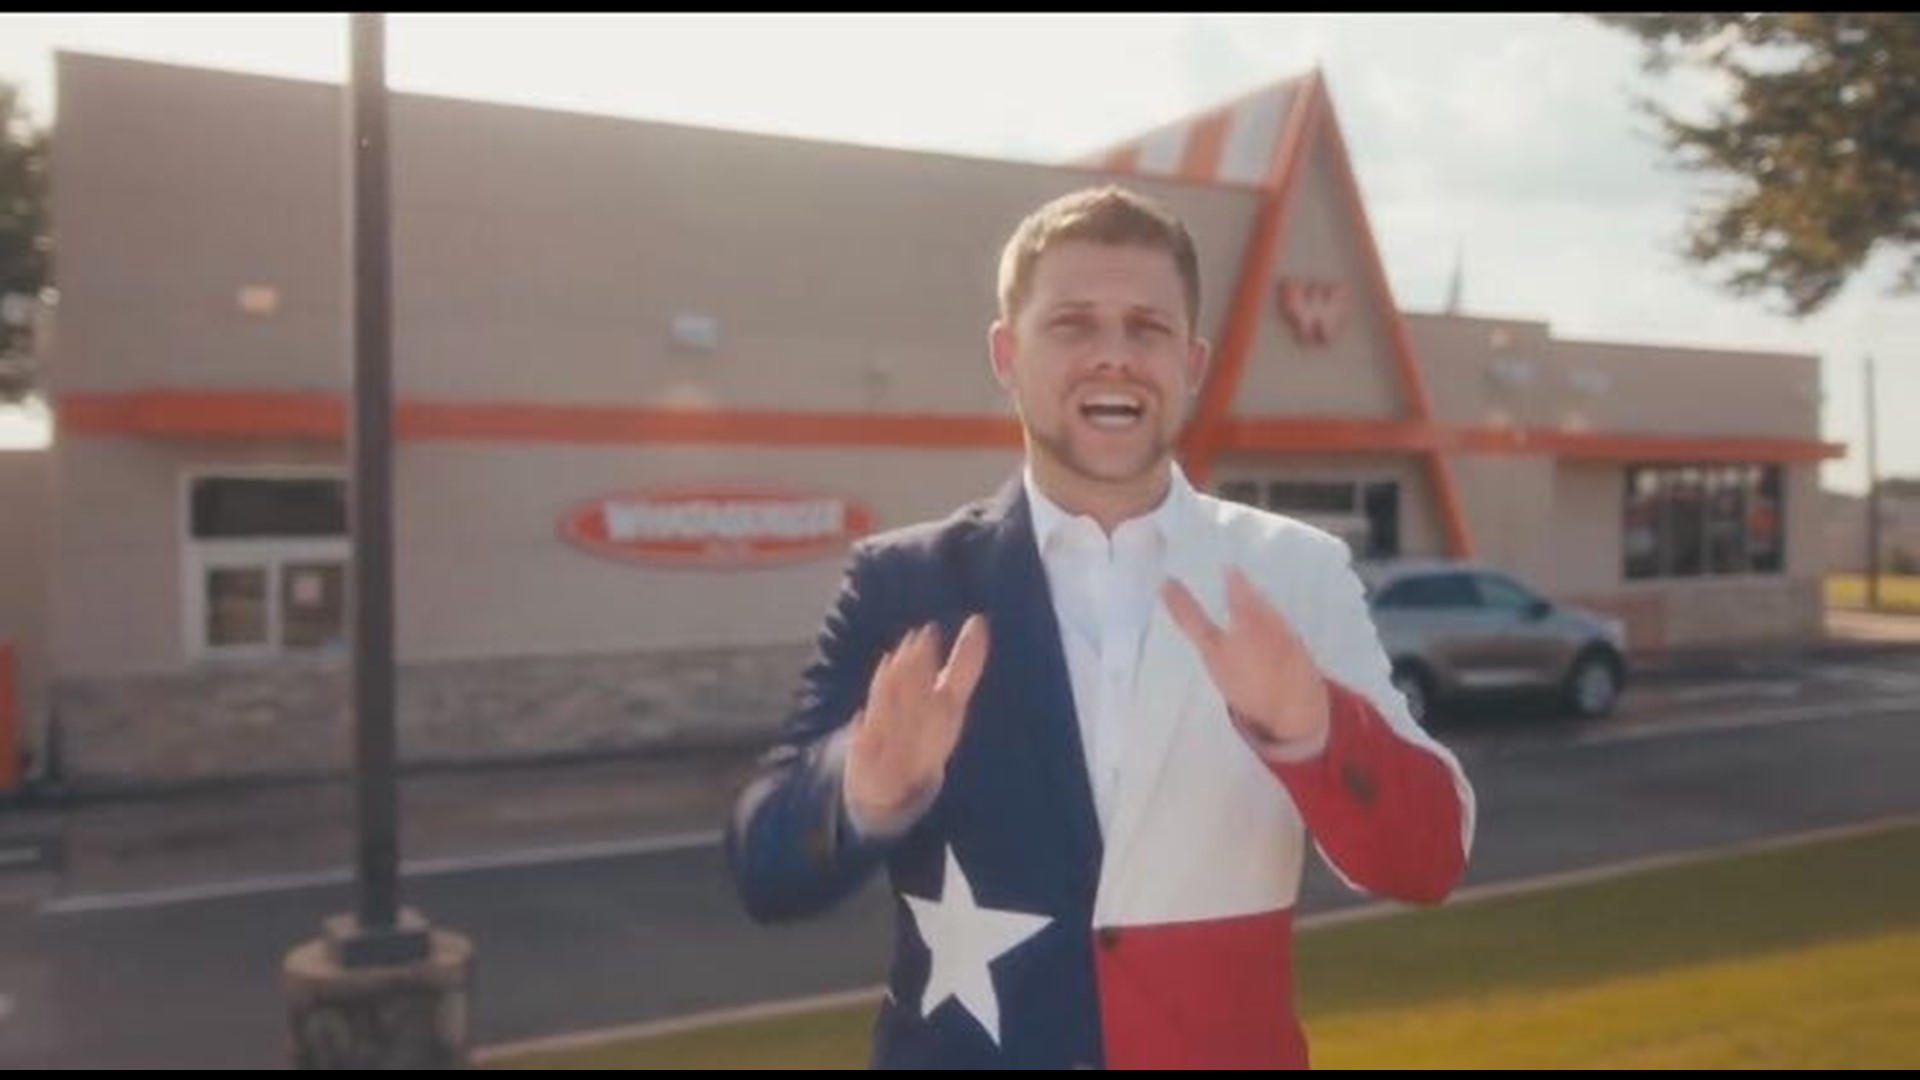 "Texas has a little something to say about Whataburger selling out to Chicago," rapper Matt Upshaw says